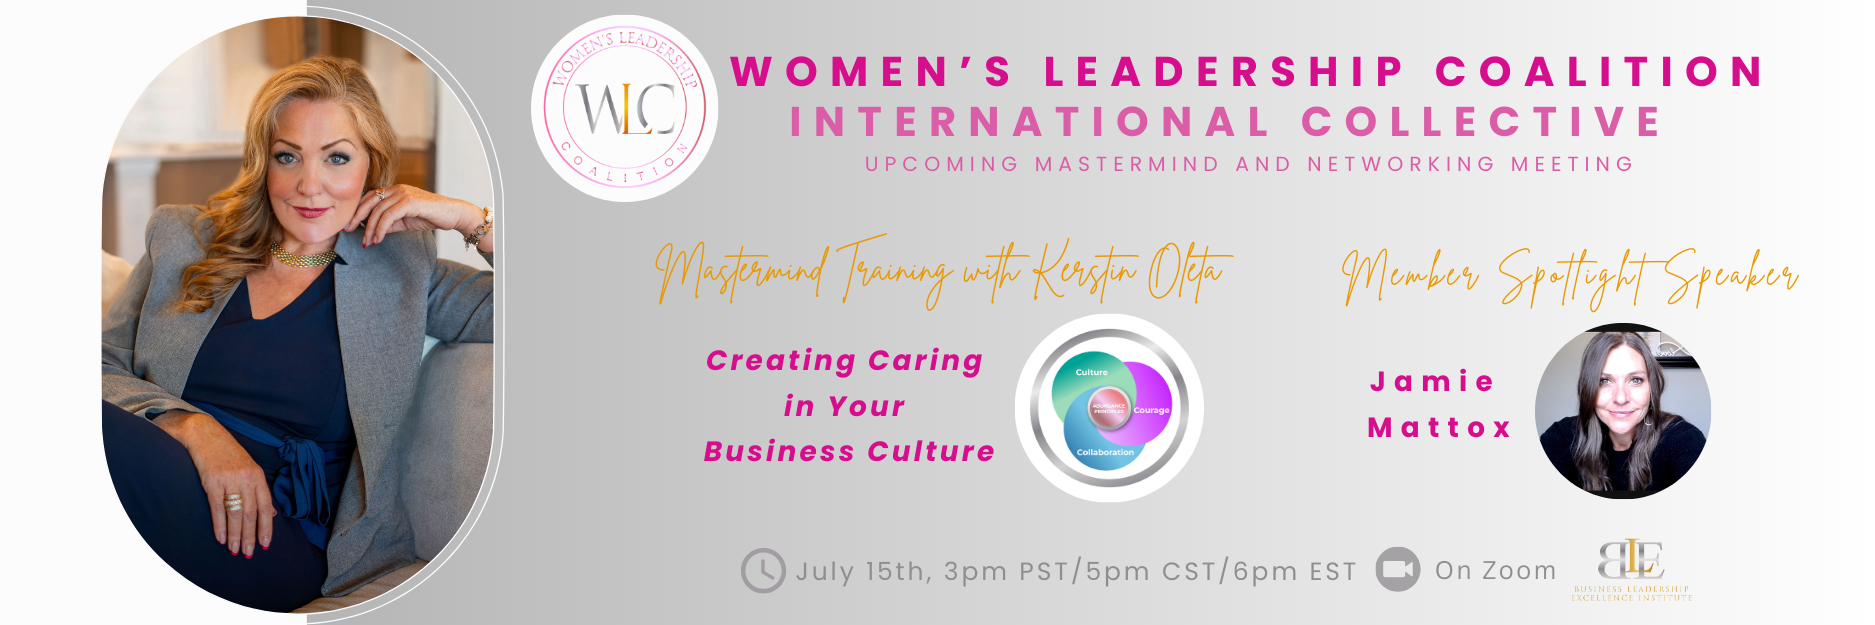 promo graphic for the women's leadership coalition event